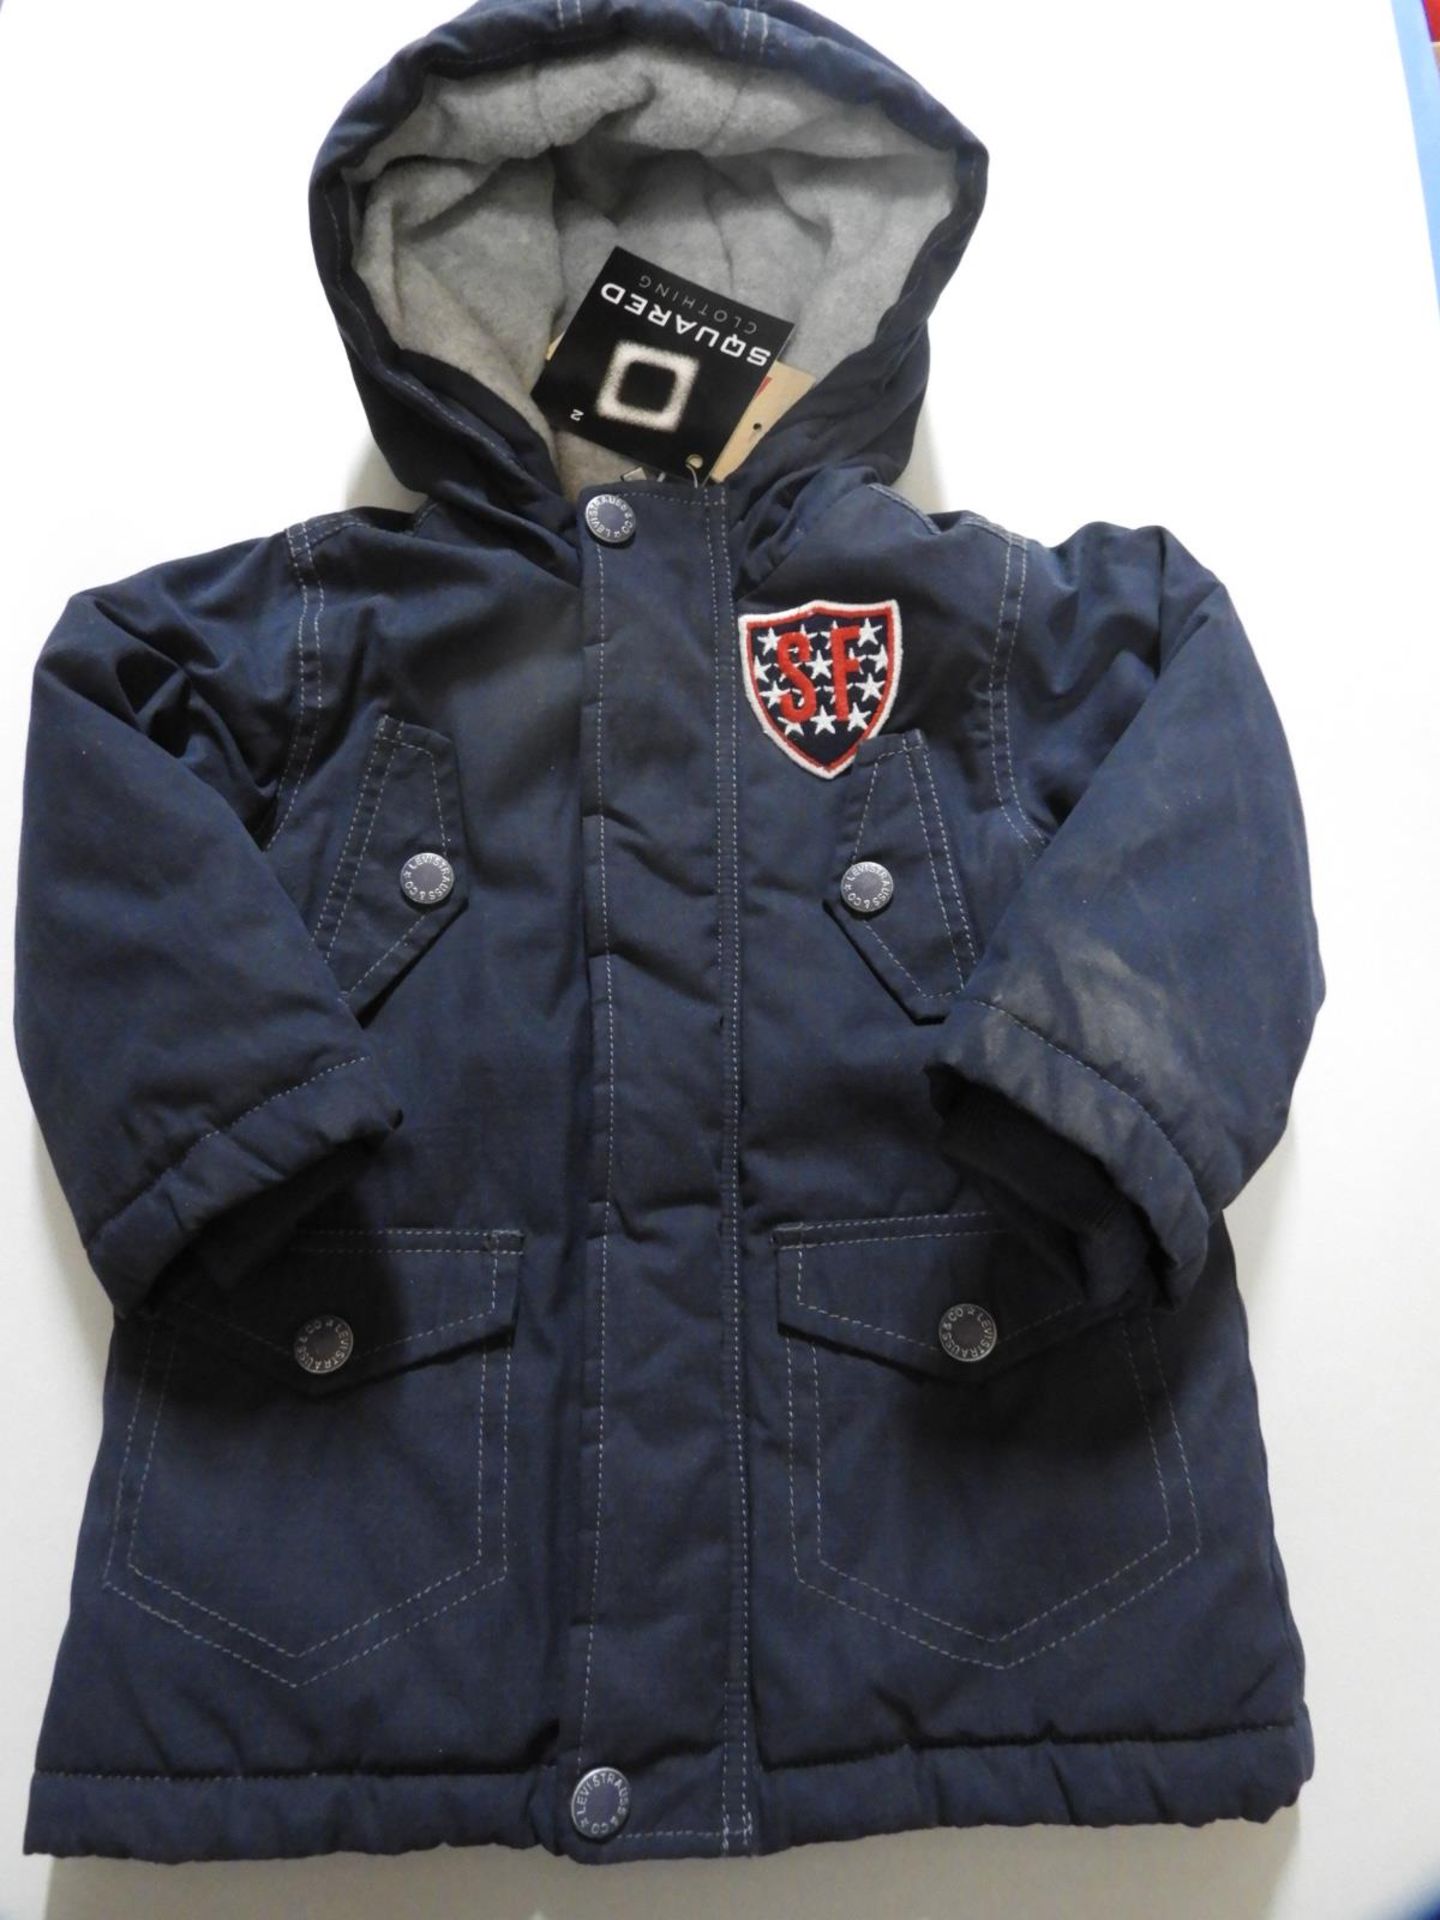 Levi Toddlers Jacket Size: 18 Months